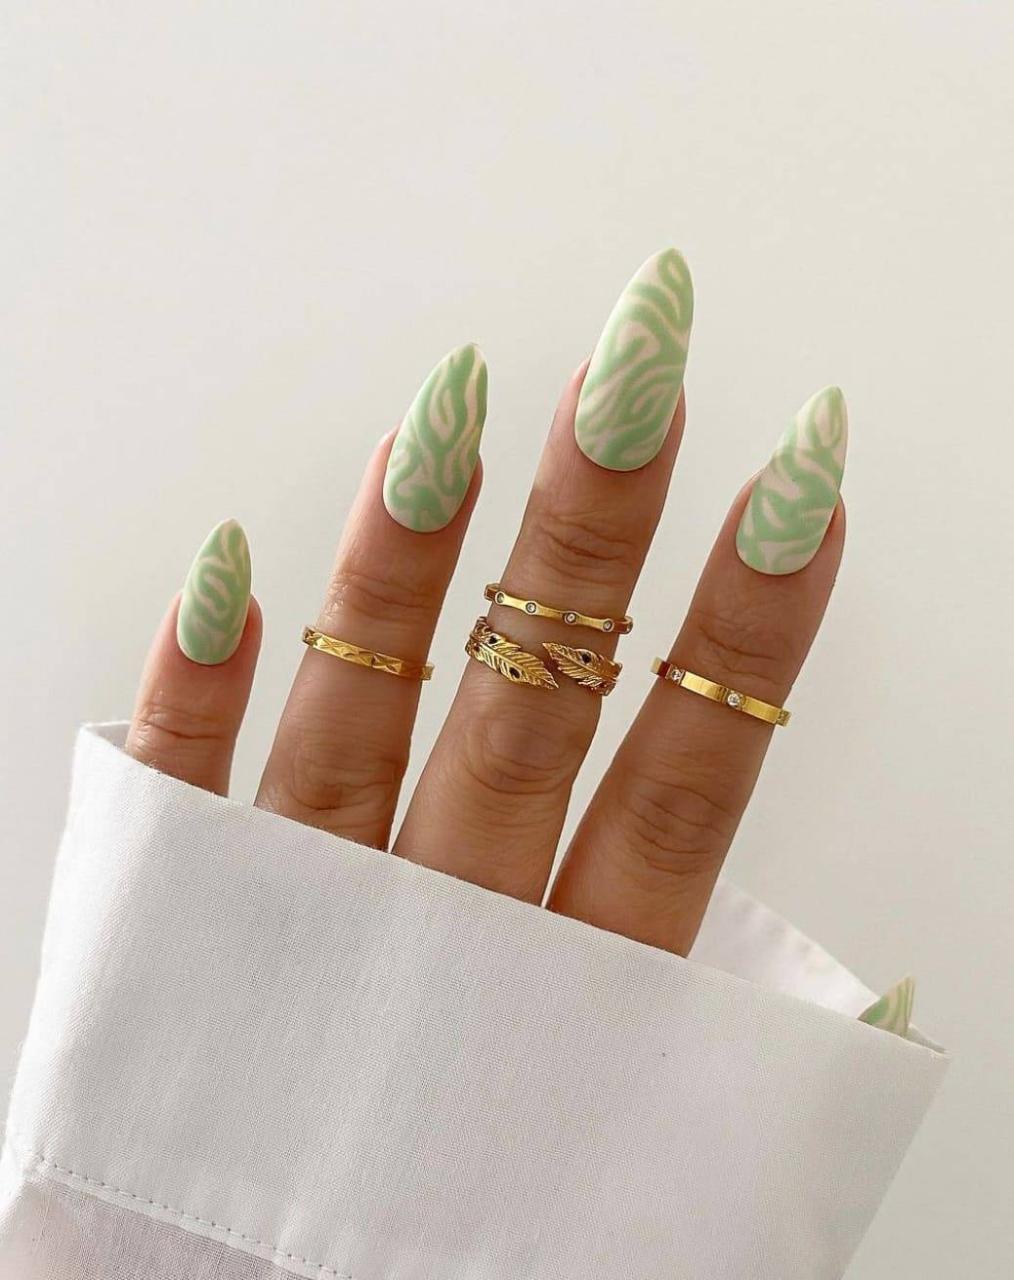 30 Fabulous Swirl Nail Designs So Easy To Copy - 229